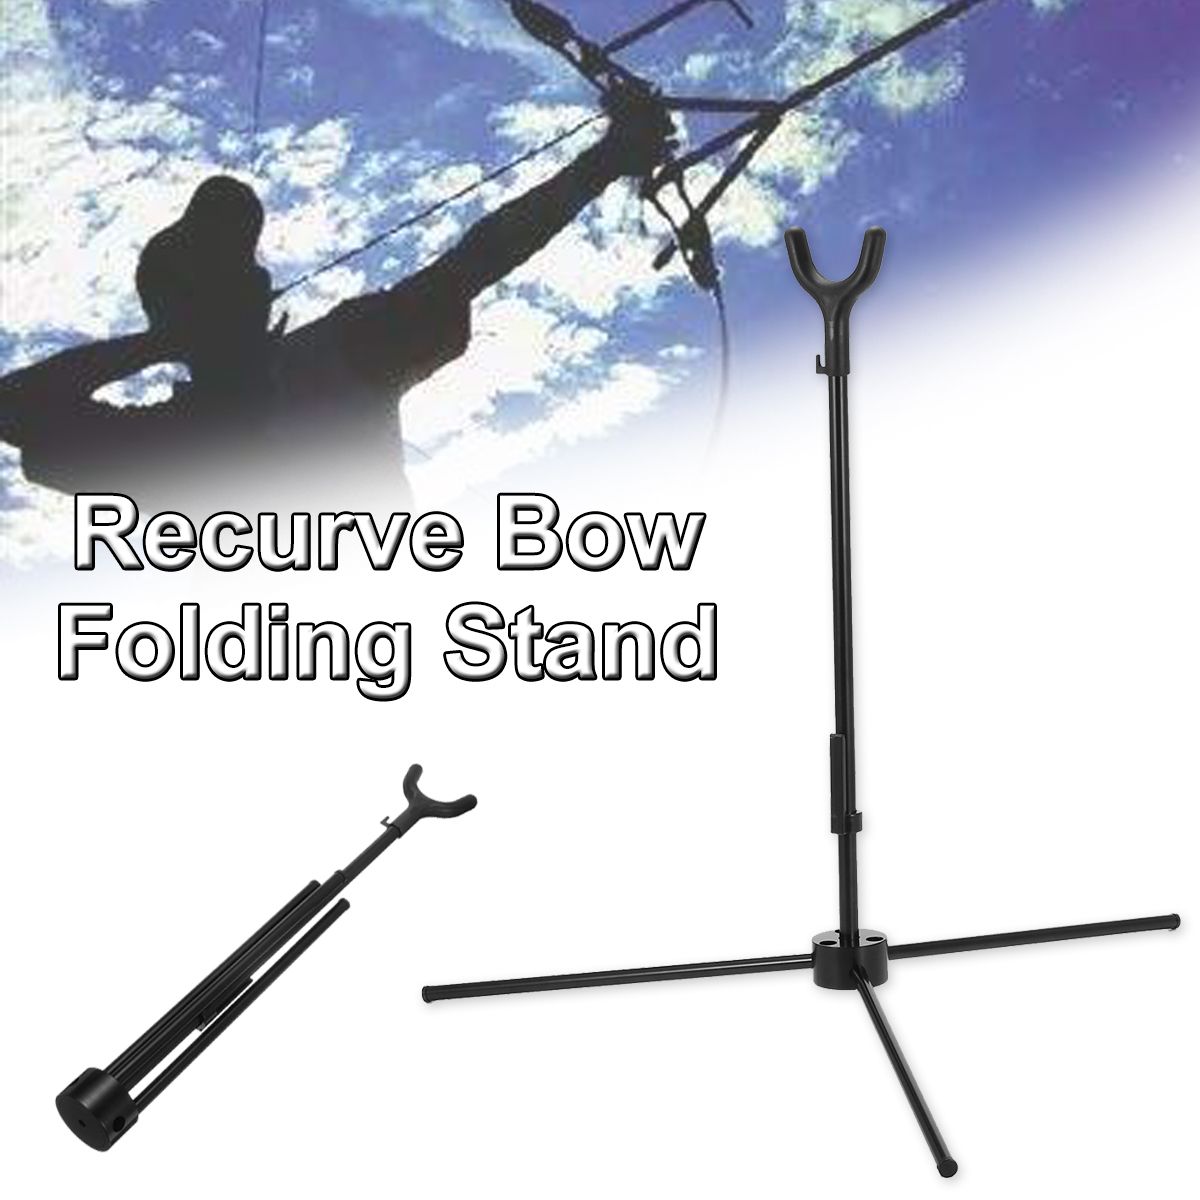 Archery-Recurve-Bow-Tripod-Stand-Folding-Collapsible-Portable-Bow-Holder-Rack-1554485